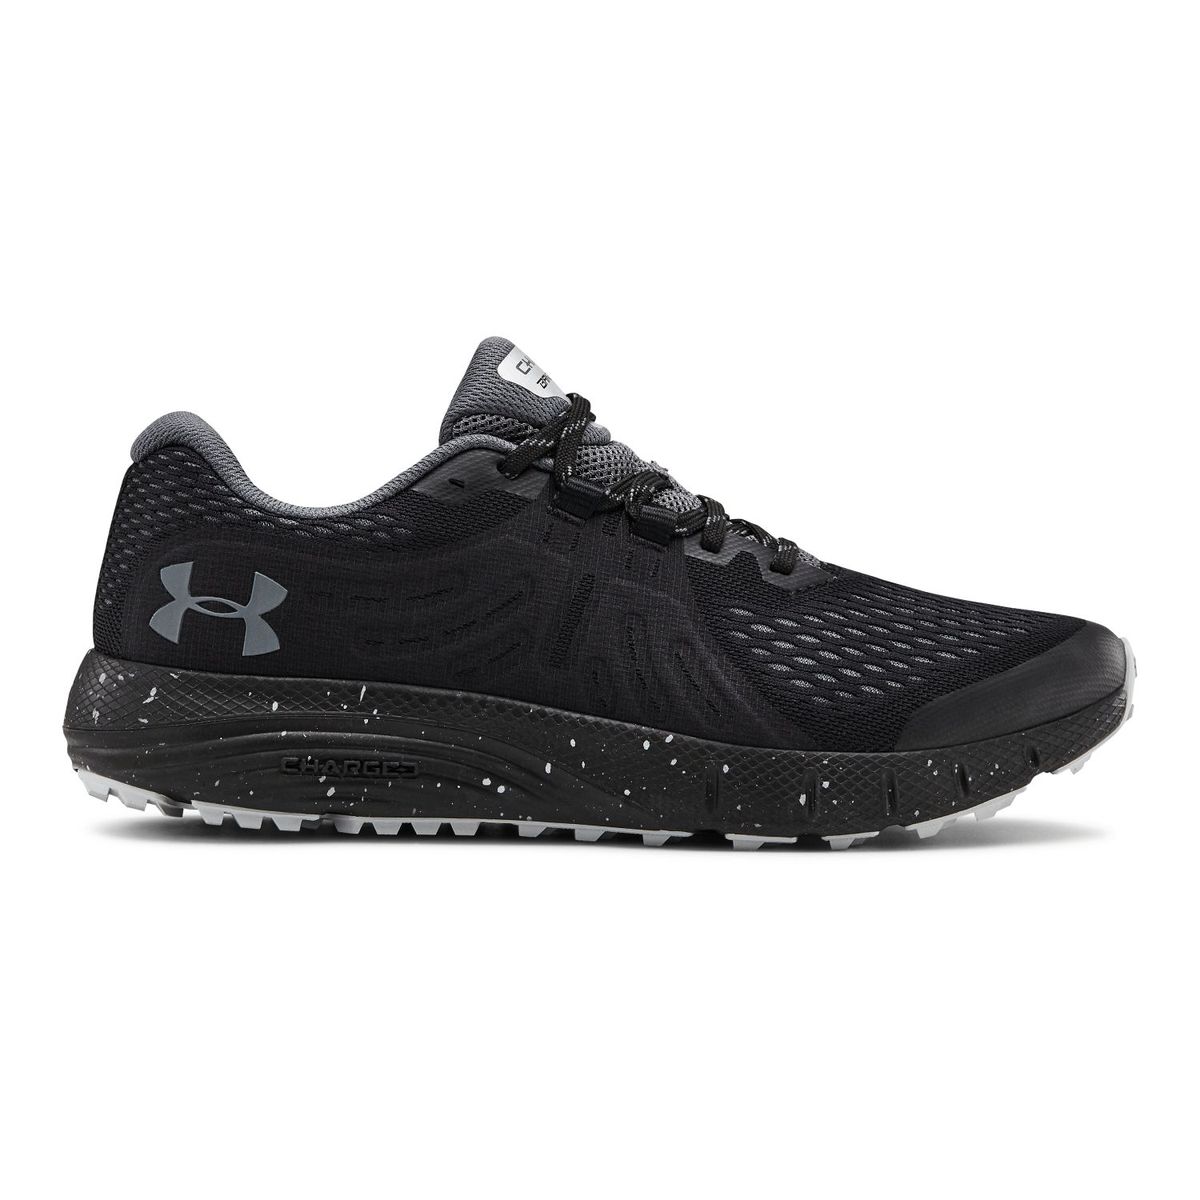 Under Armour Men's Charged Bandit Trail Running Shoes | Buy Online in ...